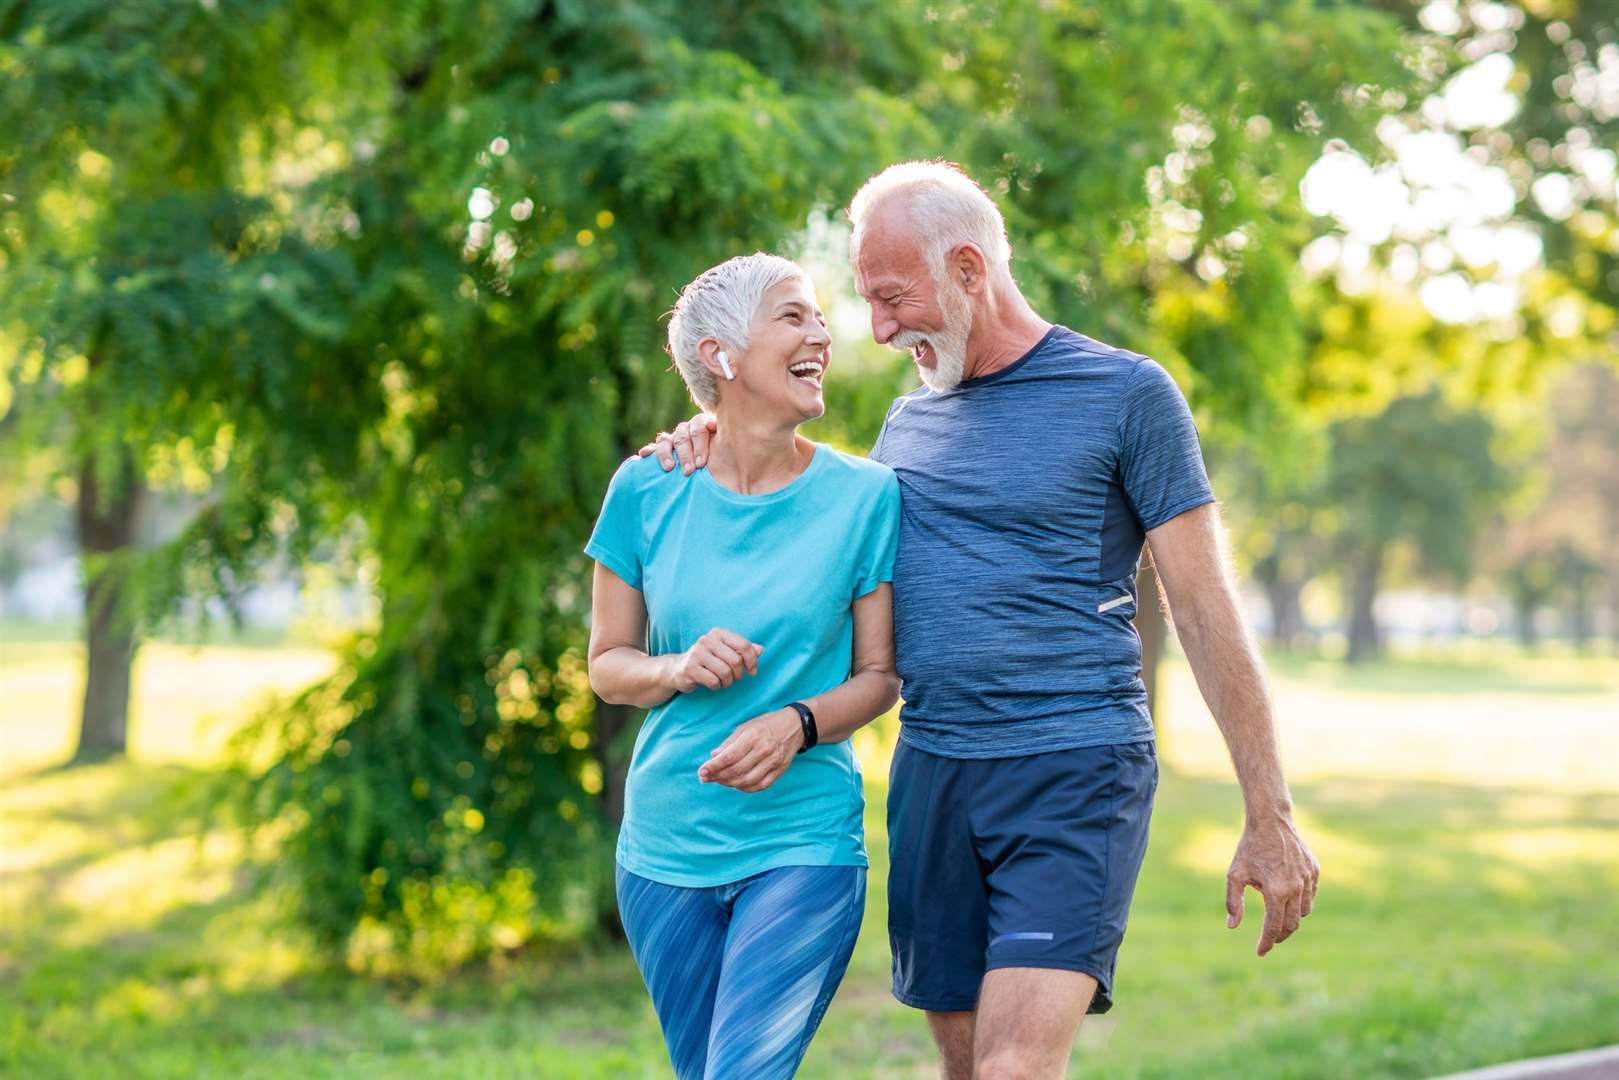 Keep active and healthy this summer, whatever your age